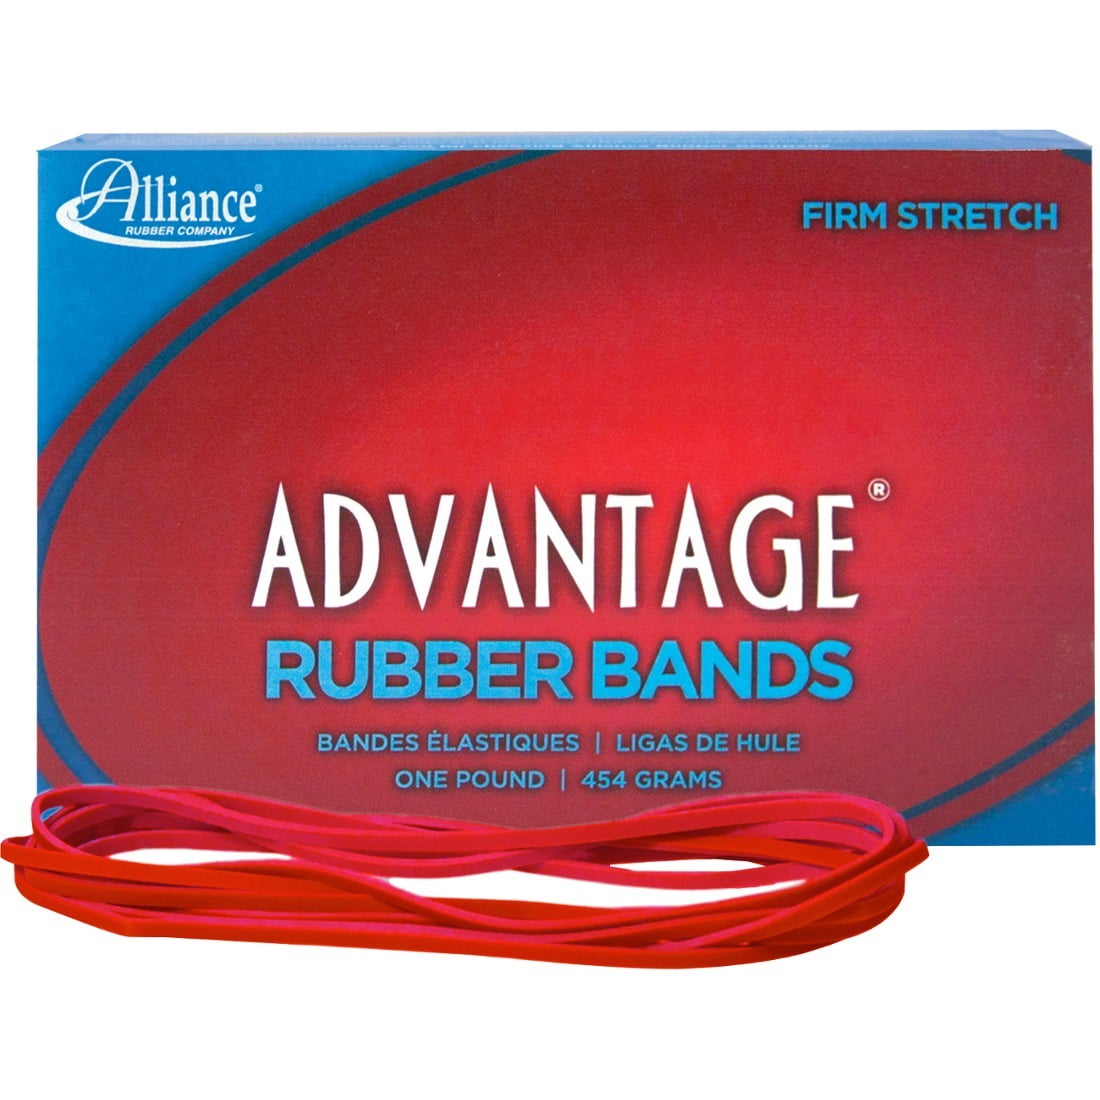 Alliance Rubber 97405 Advantage Rubber Bands Size #117B 7 x 1/8, Red 1 lb Box Contains Approx 200 Bands 